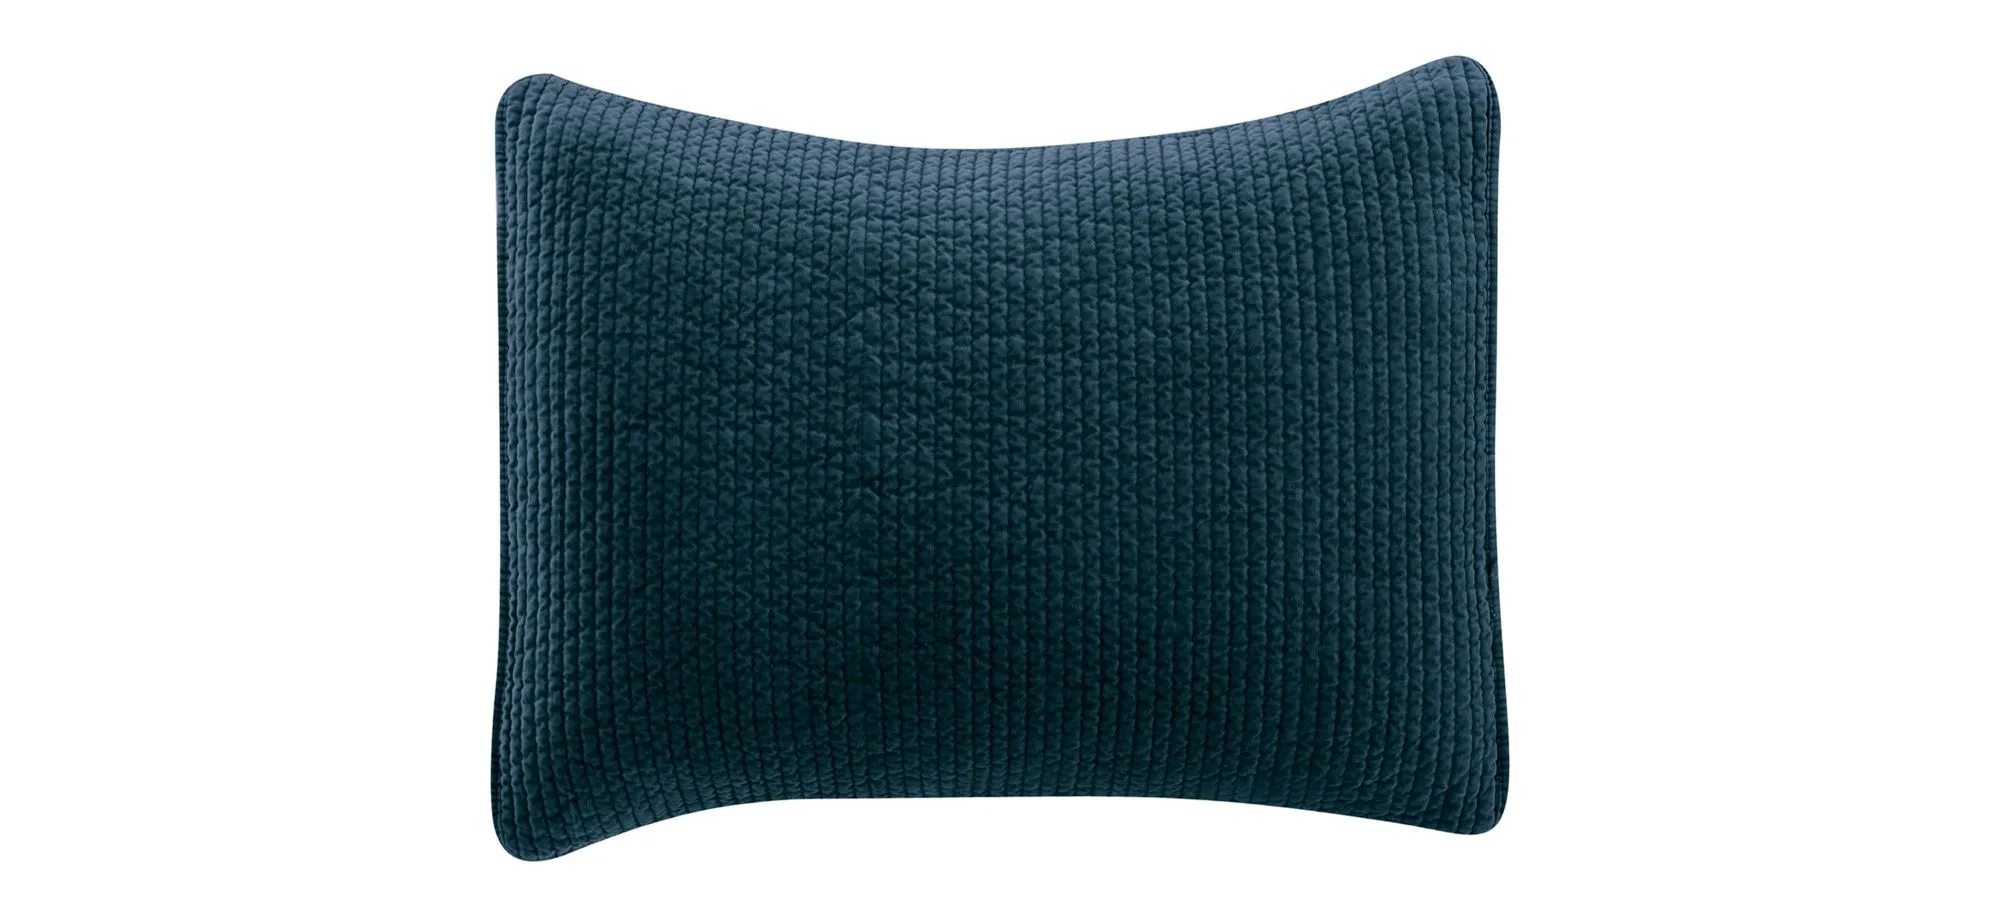 Stonewashed Cotton Velvet Quilted Pillow Sham in Deep Blue by HiEnd Accents